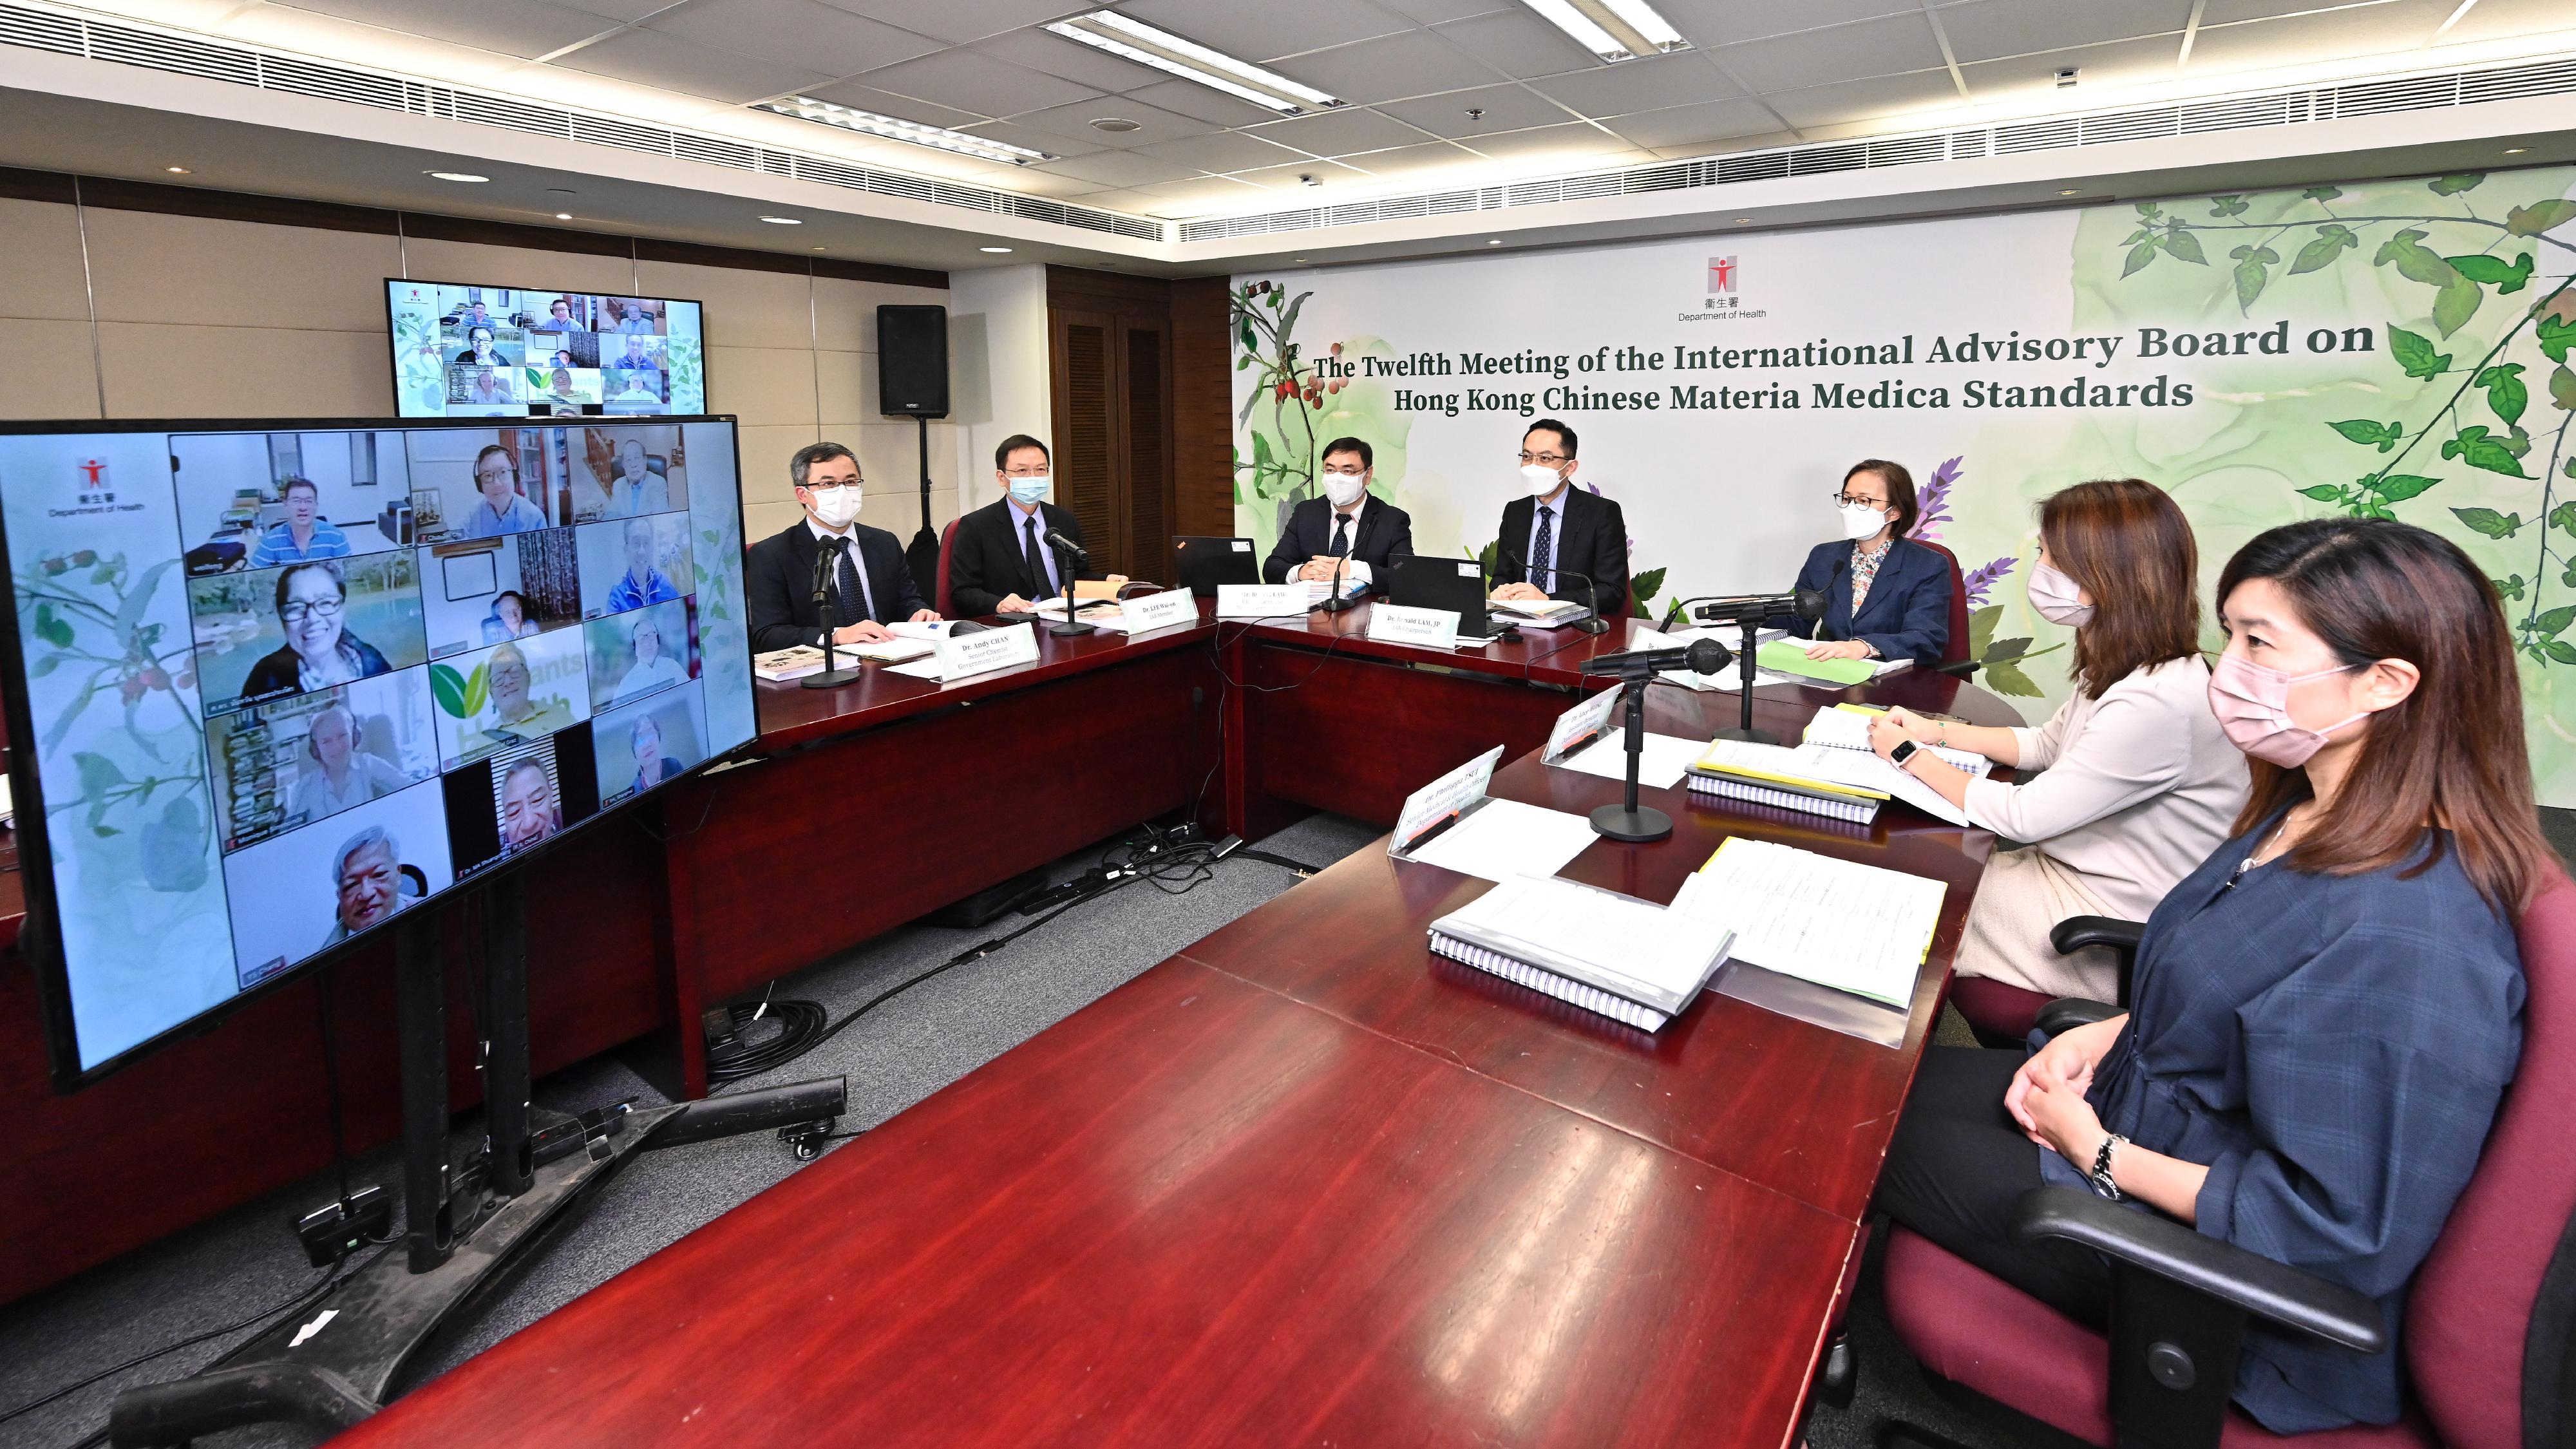 The Department of Health (DH) yesterday (August 16) hosted the 12th meeting of the International Advisory Board on Hong Kong Chinese Materia Medica Standards via video conference to finalise the setting of reference standards for Chinese Materia Medica commonly used in Hong Kong. Photo shows the Director of Health, Dr Ronald Lam (centre); the Controller of Regulatory Affairs of the DH, Dr Amy Chiu (third right); the Government Chemist, Dr Lee Wai-on (second left); the Assistant Director of Health (Chinese Medicine), Dr Alice Wong (second right), and other participants joining the meeting.